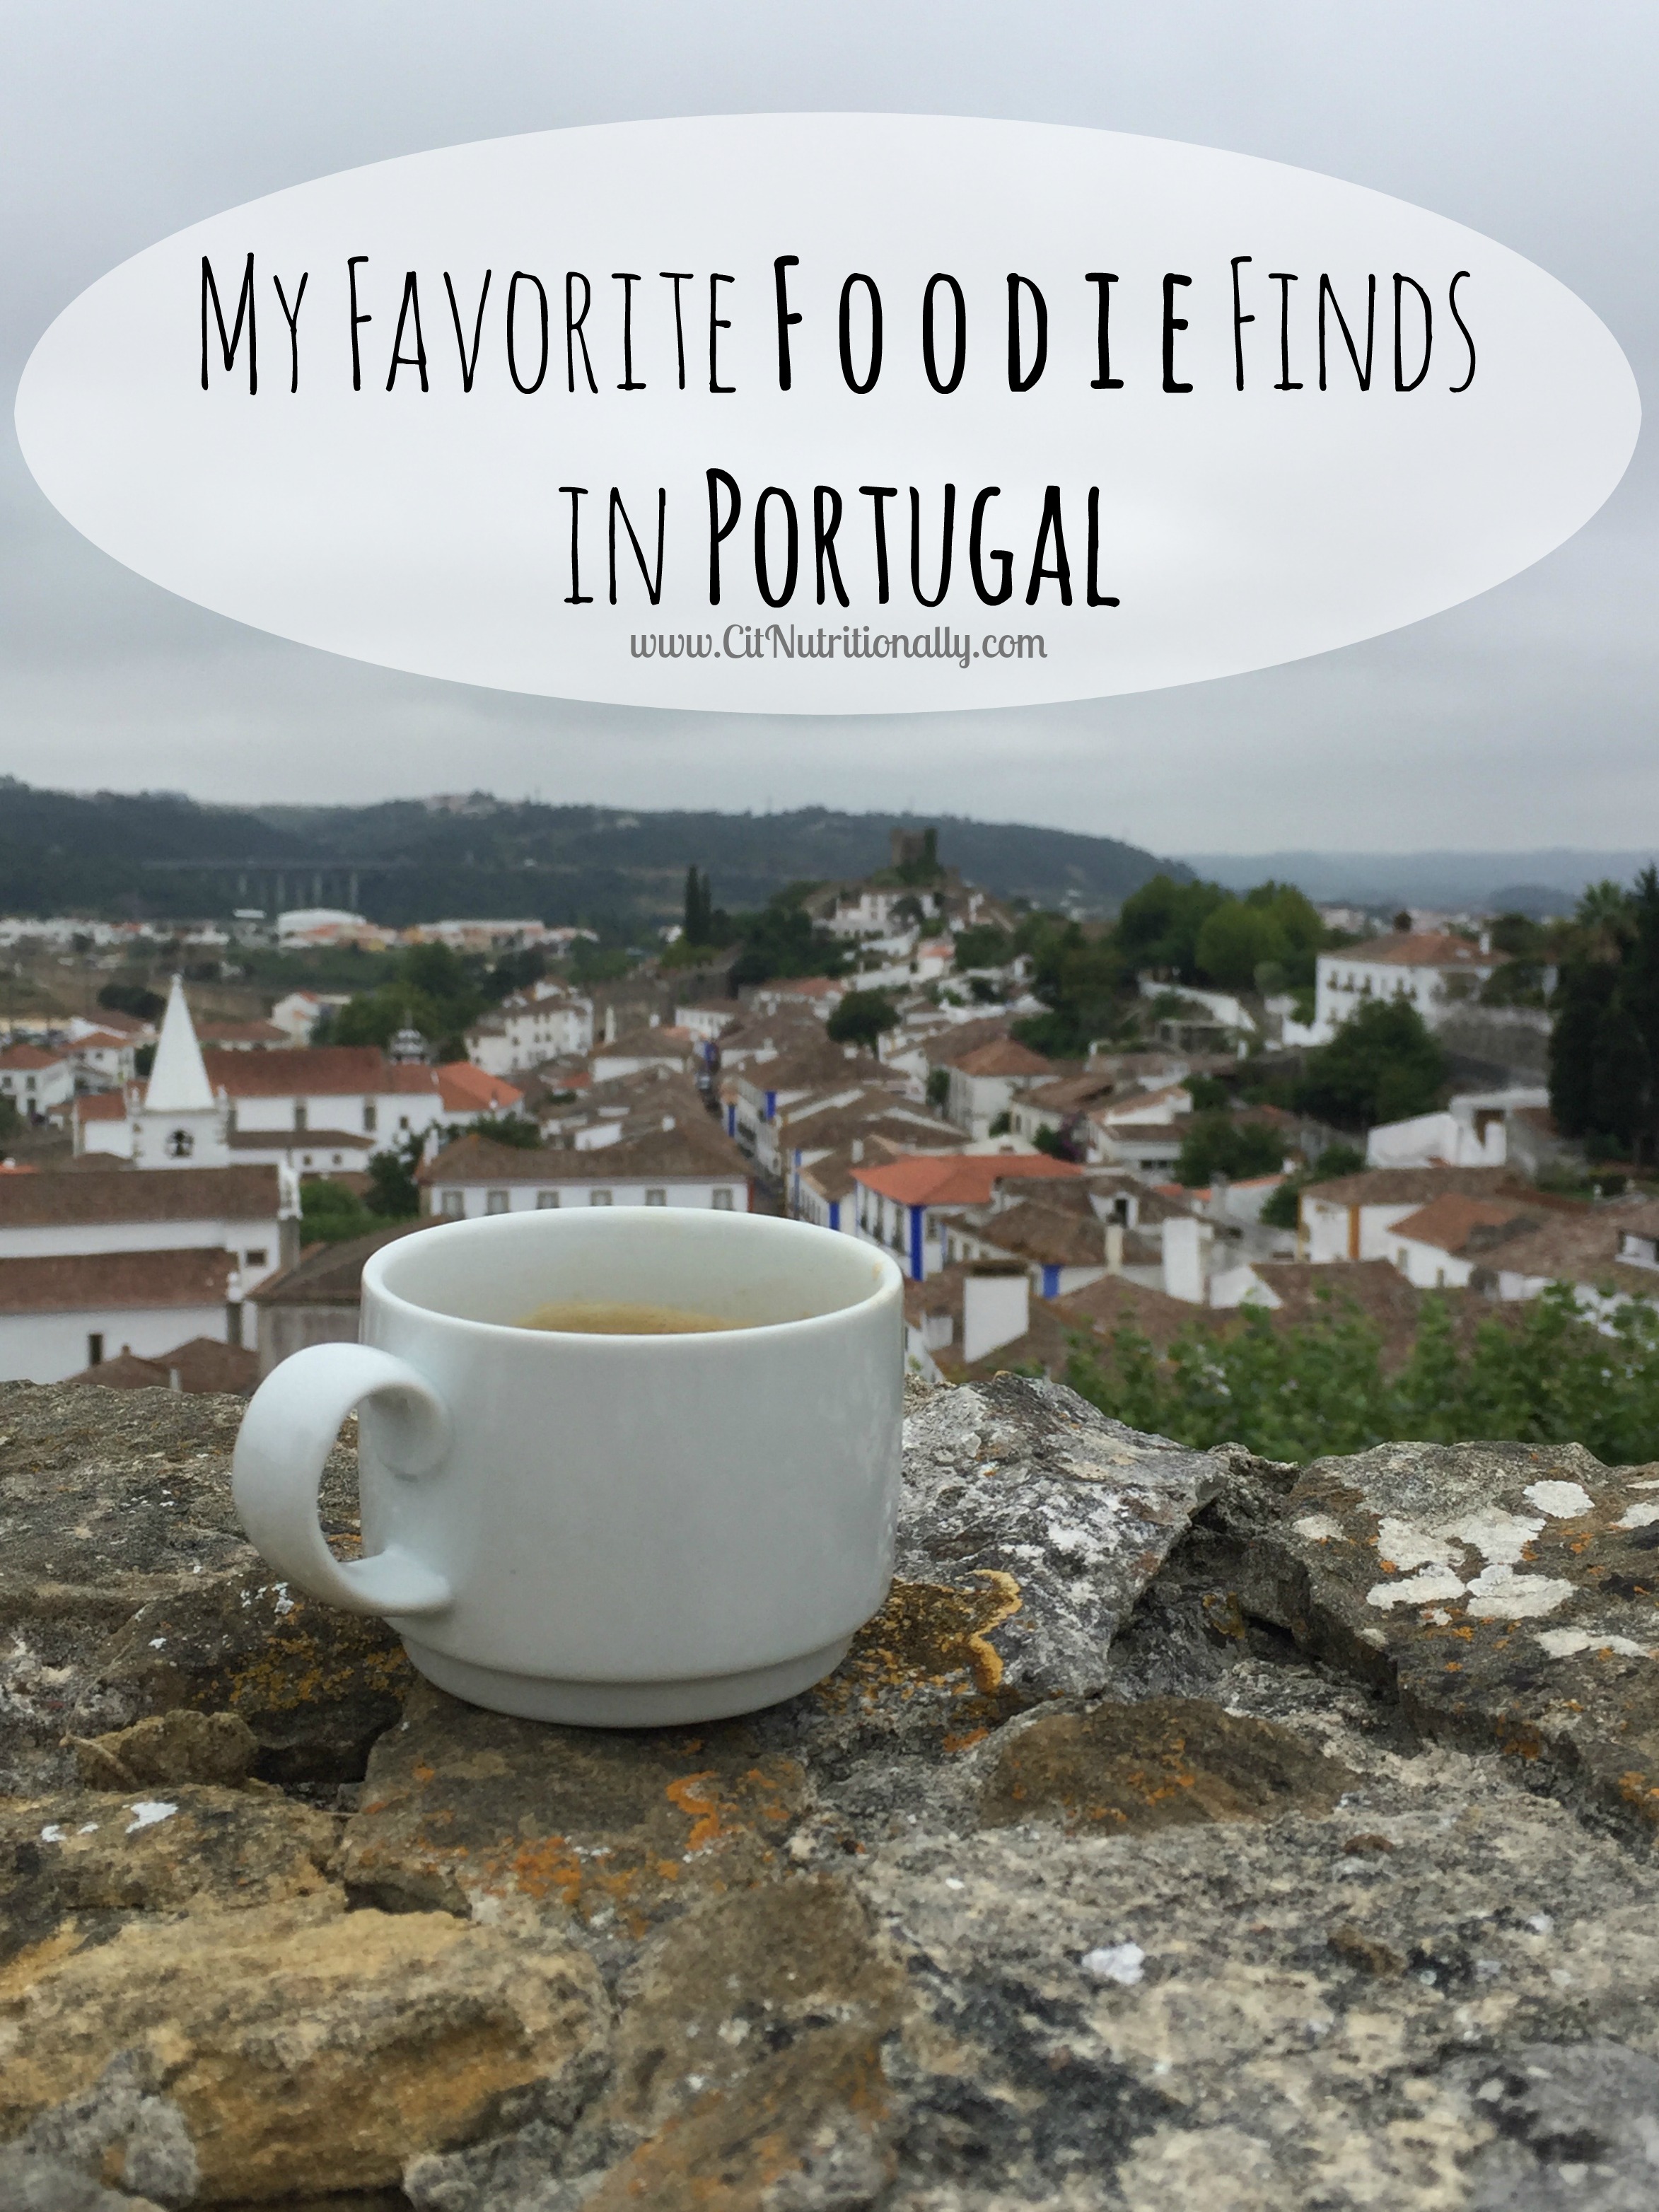 My Favorite Foodie Finds in Portugal | C it Nutritionally #travel #healthyfood #healthytravel #Portugal 